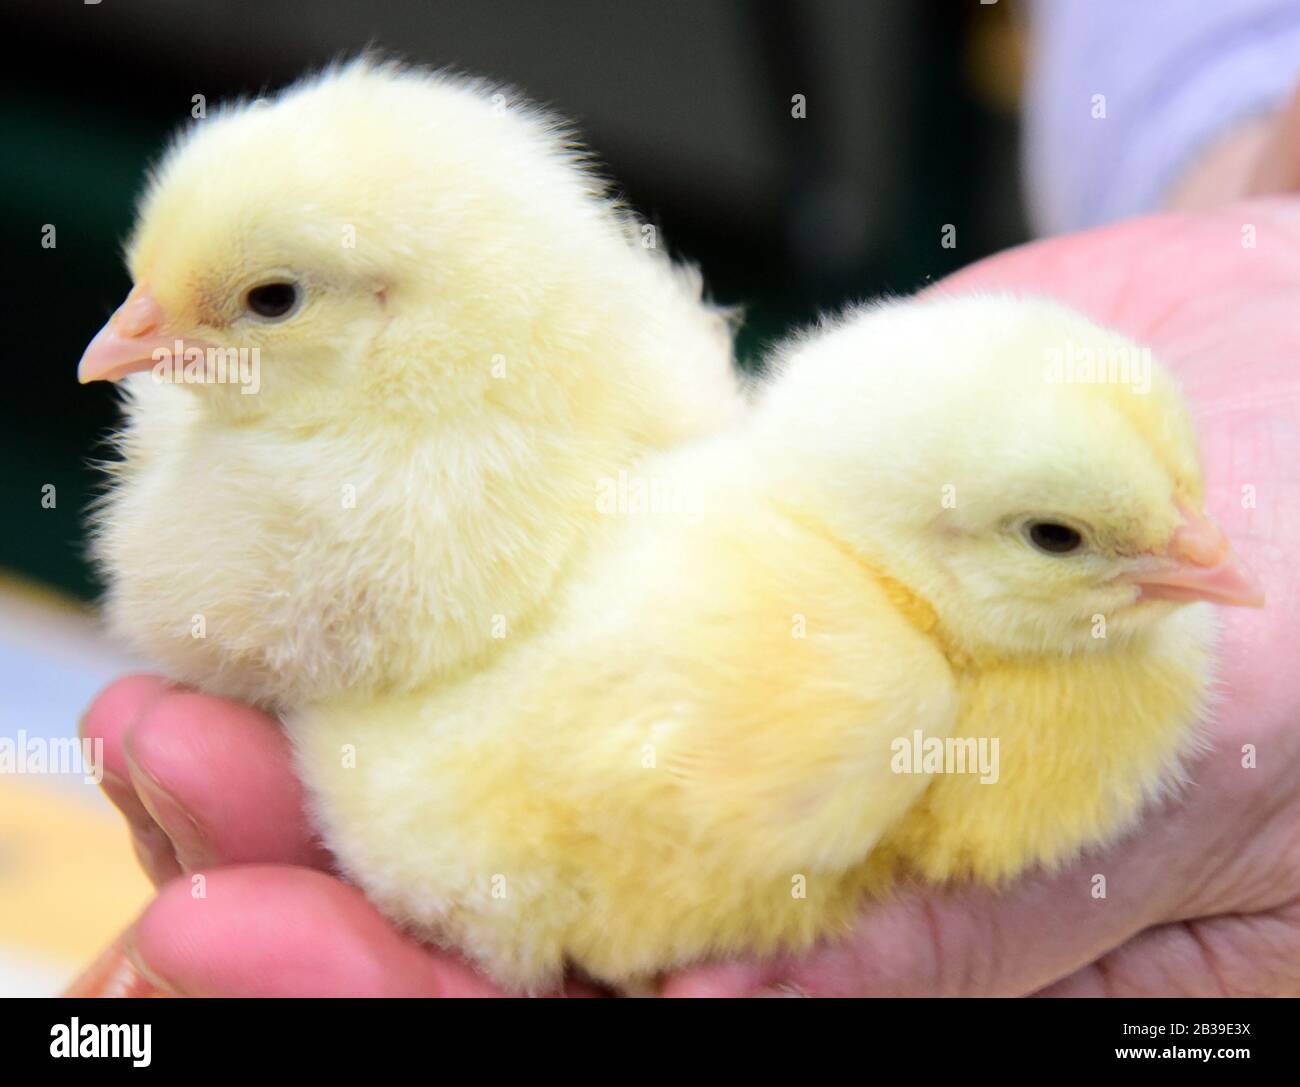 Leipzig, Germany. 17th Feb, 2020. At the Haus-Garten-Freizeit trade fair at the New Trade Fair Centre in Leipzig, two chicks hatched the day before sit on one hand. The fair took place from 15 to 23 February 2020. Credit: Waltraud Grubitzsch/dpa-Zentralbild/ZB/dpa/Alamy Live News Stock Photo